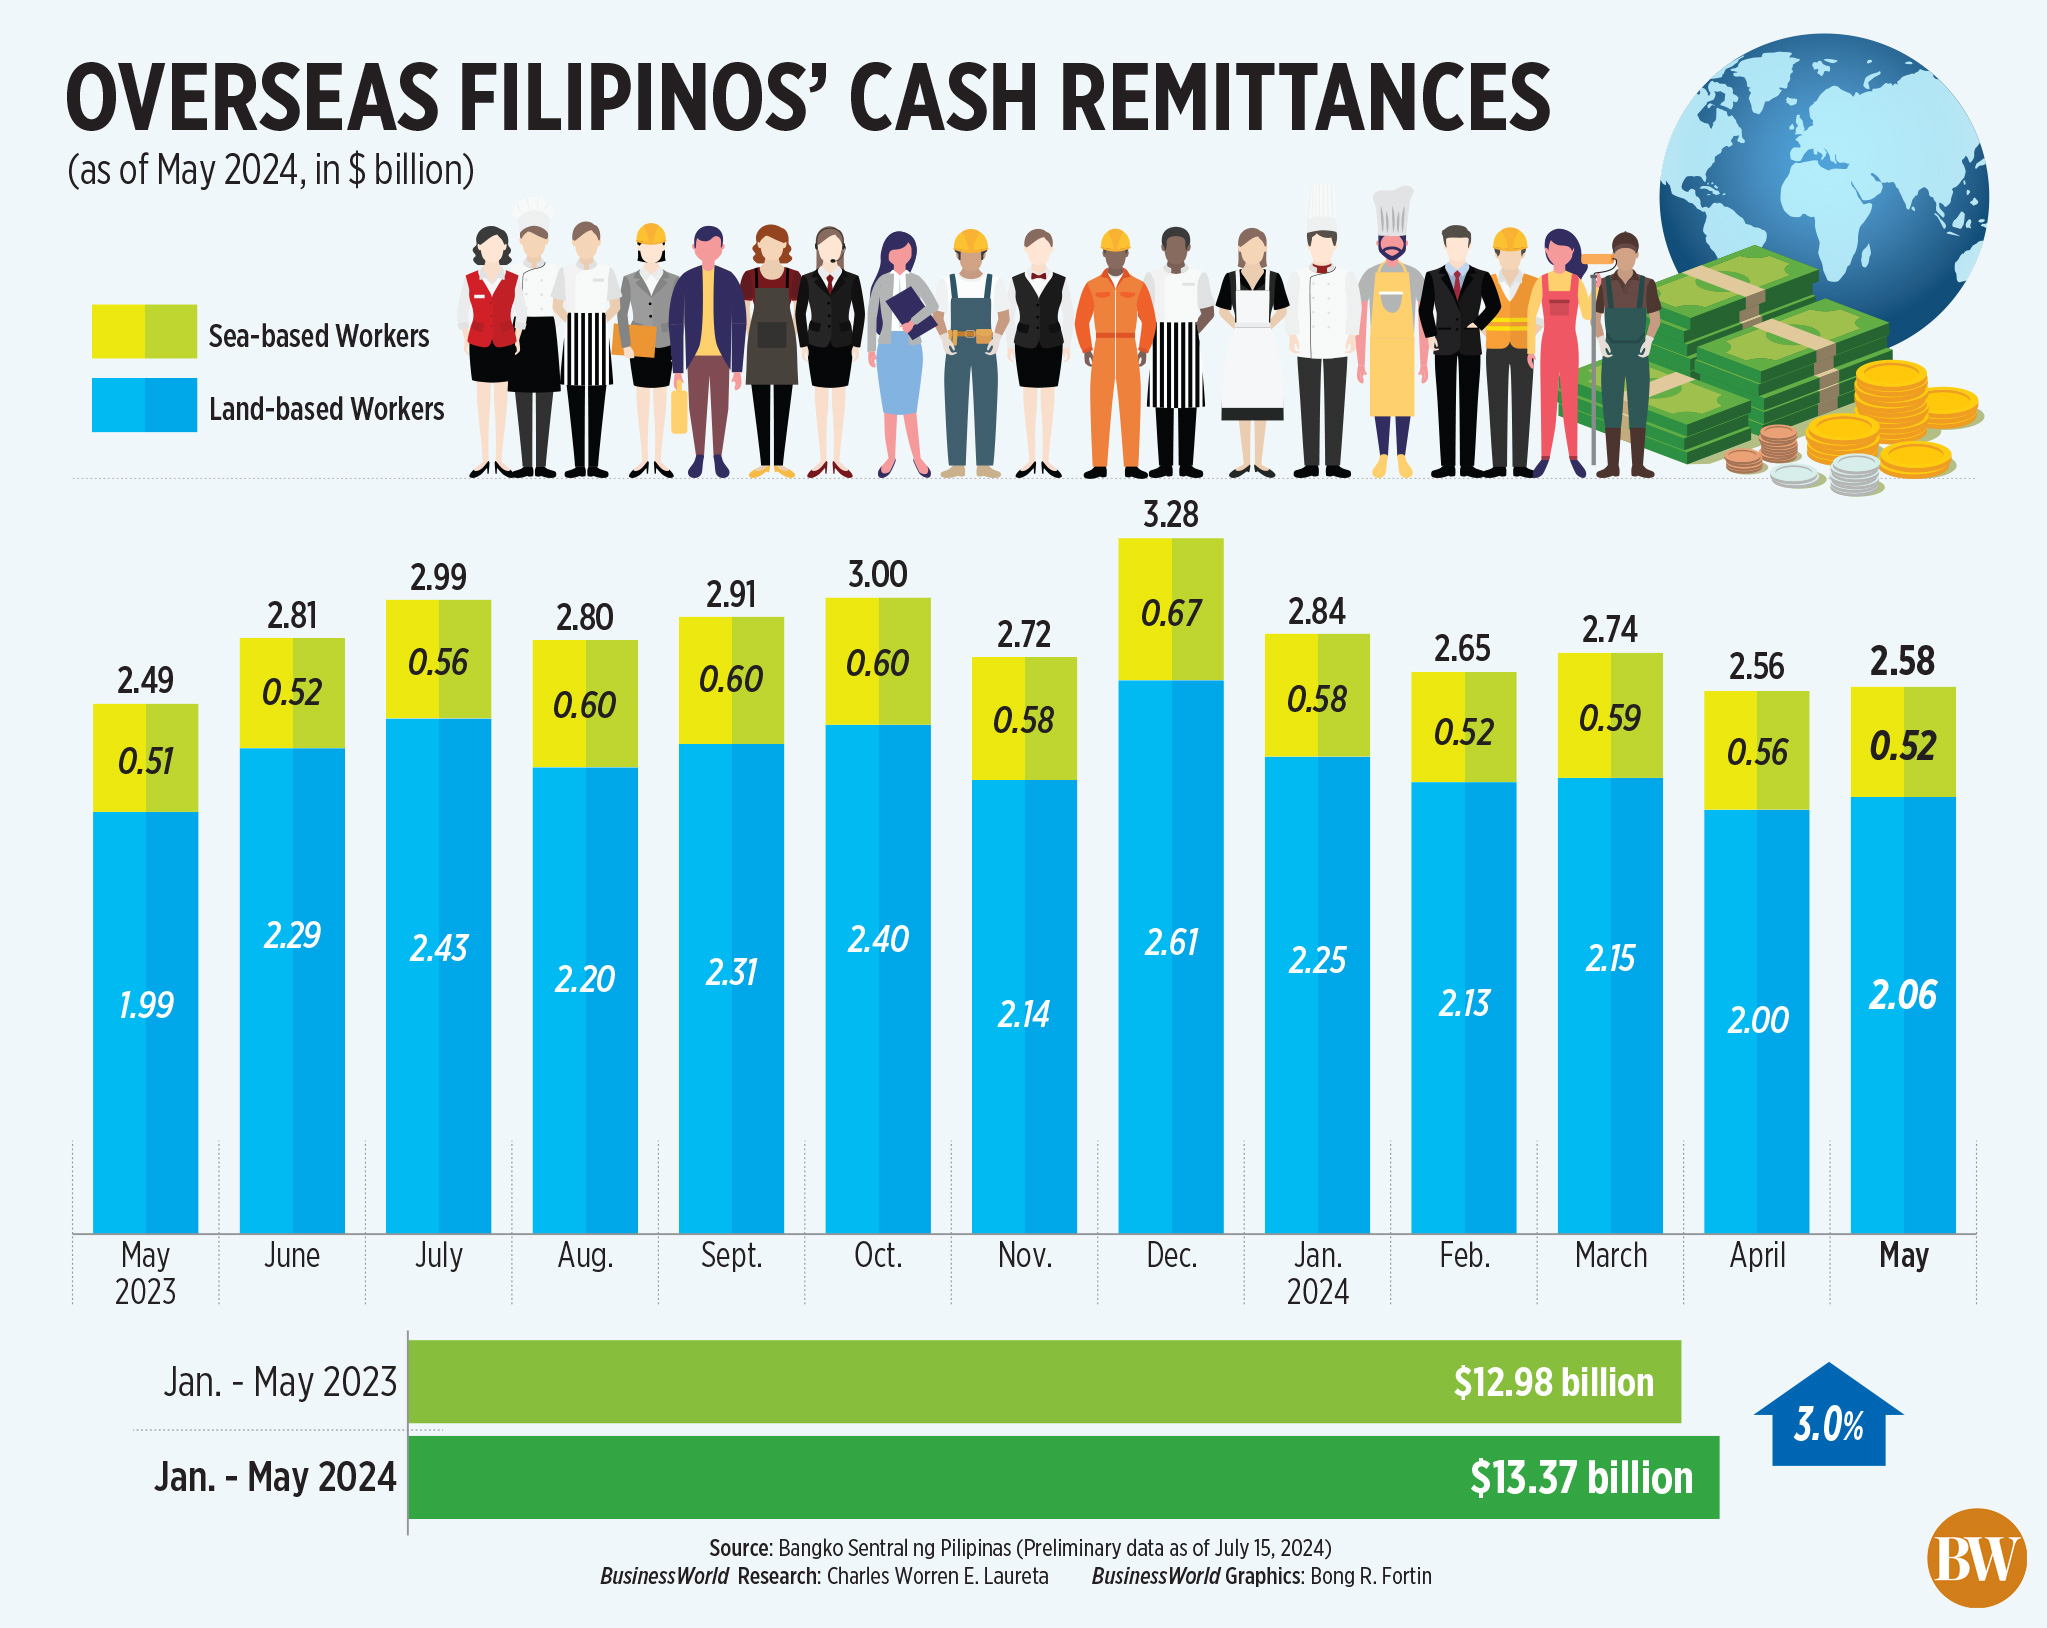 Remittances from Filipinos abroad